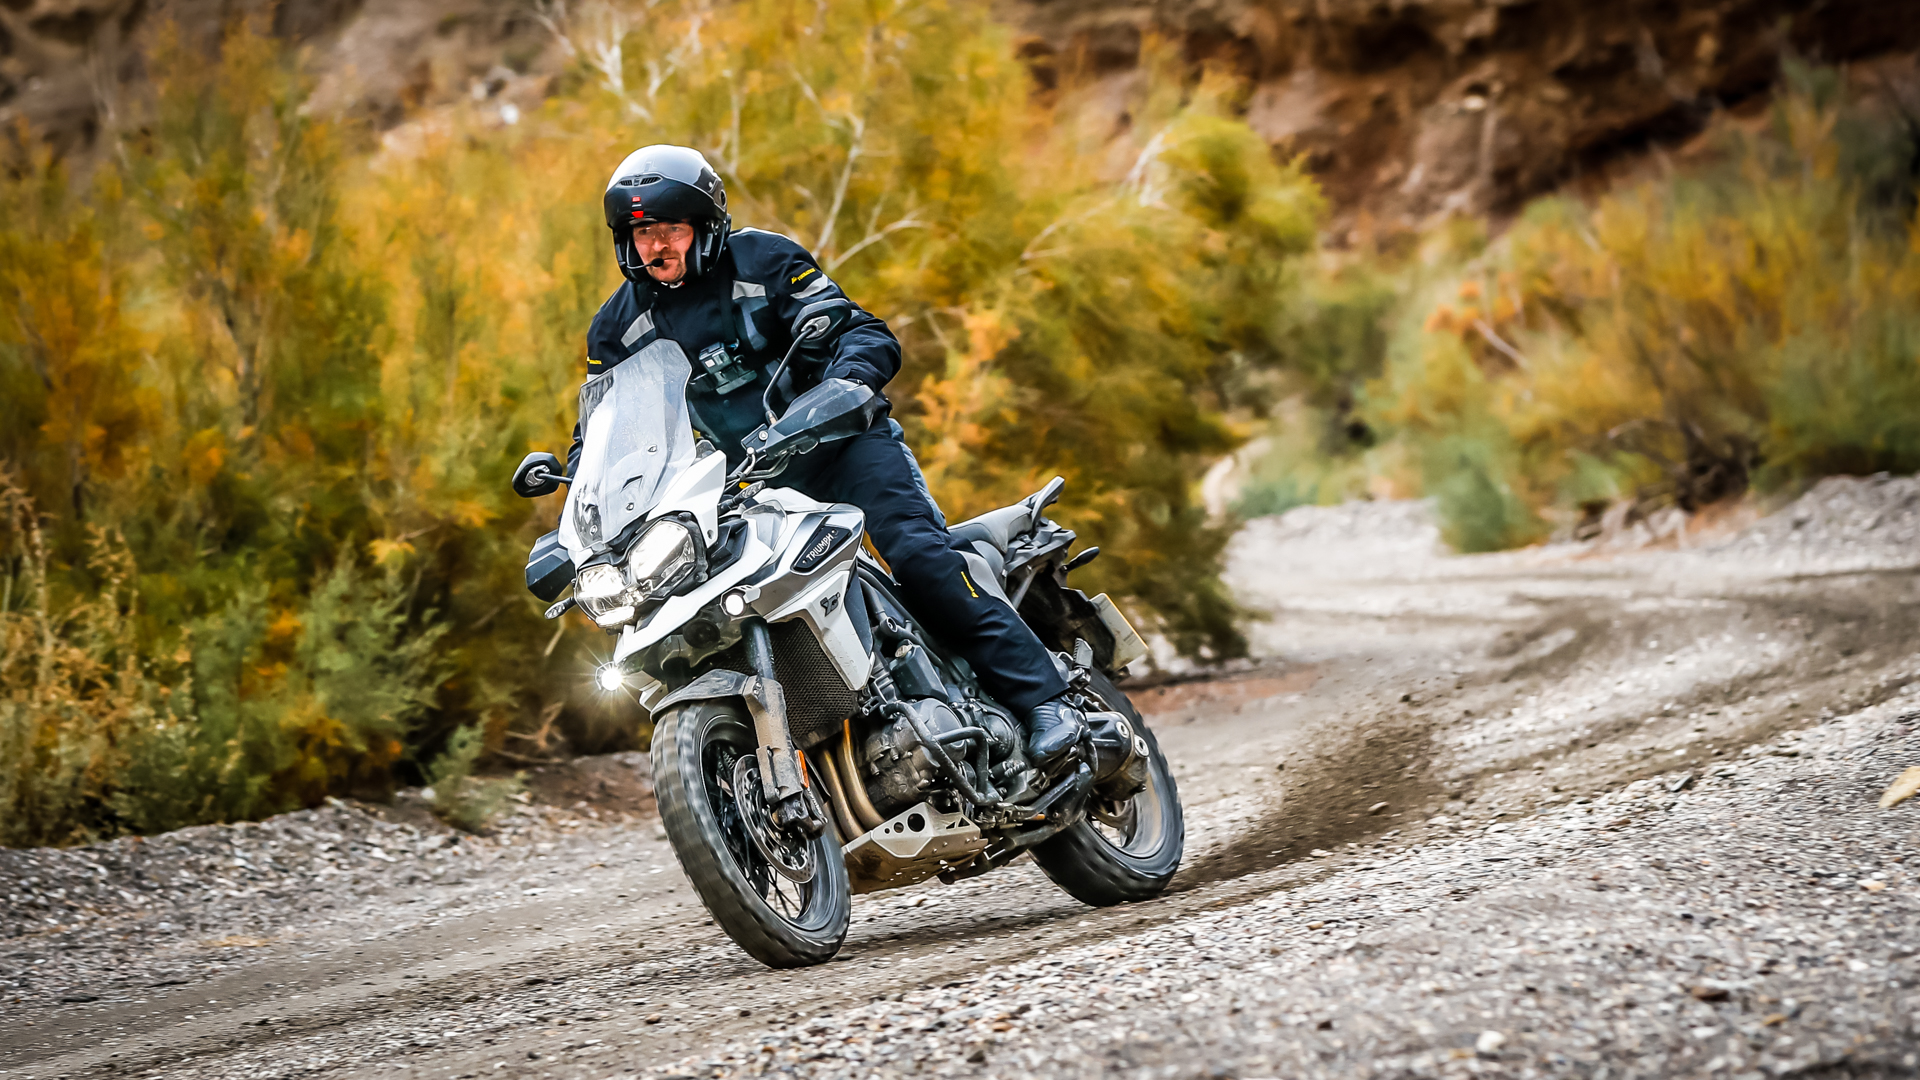 New 2022 Triumph Tiger 1200 Launch in India Live Triumph Tiger 1200 On  Road Price in India Features Specifications Images Color Variants  Mileage Engine Reviews and More  The Financial Express